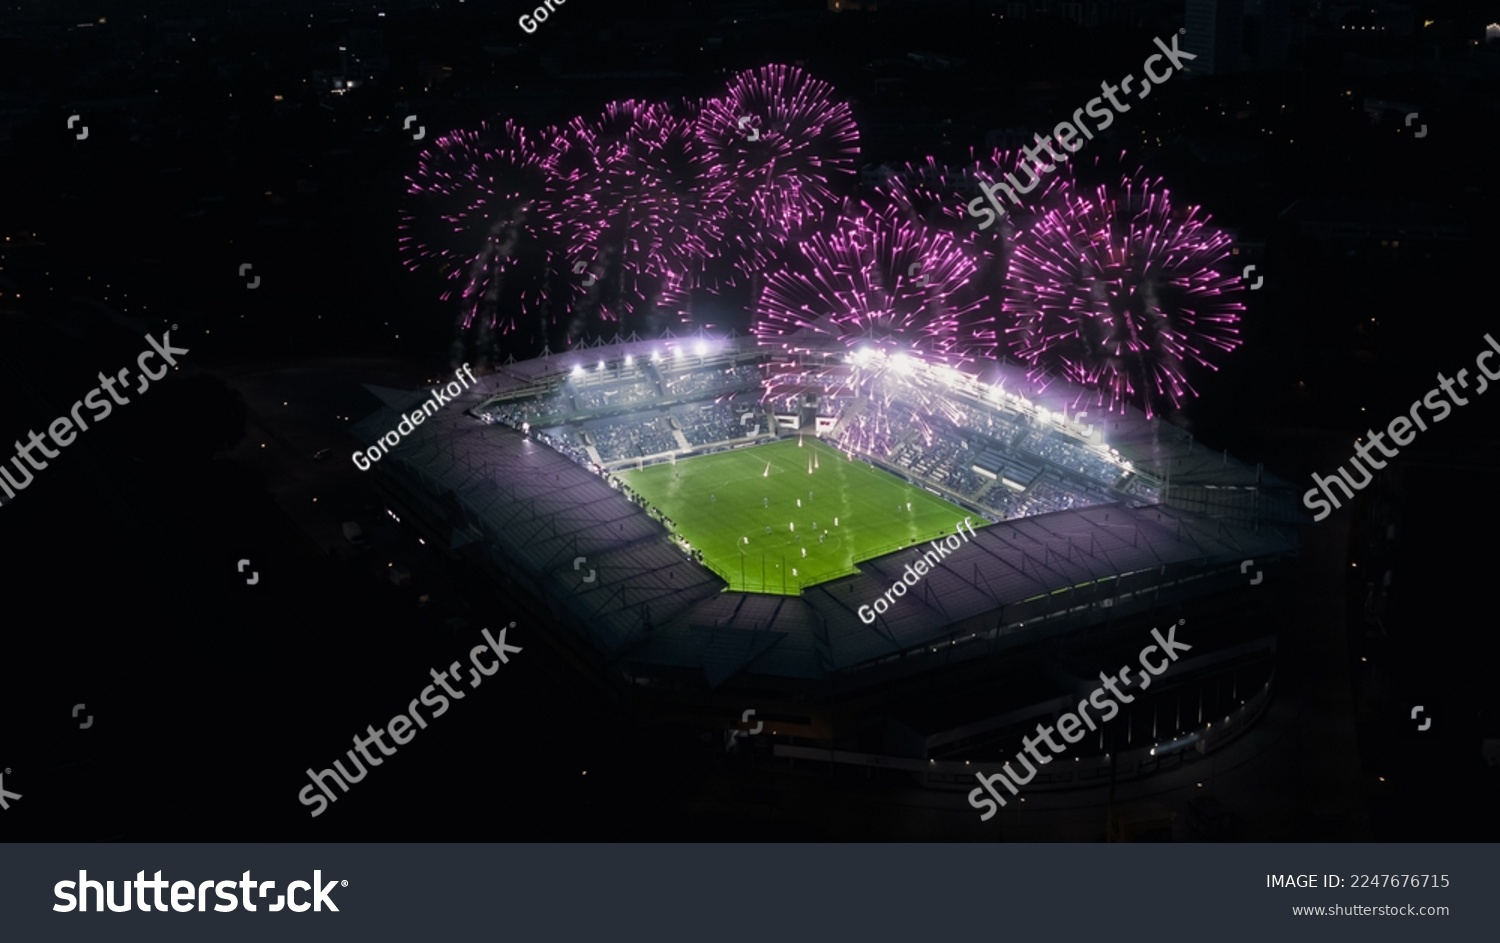 Aerial Establishing Shot of a Whole Stadium with Soccer Final Match Starting. Teams Play, Crowd of Fans Cheer, Fireworks Launched From Top of The Arena. Football Tournament, Cup TV Broadcast. #2247676715